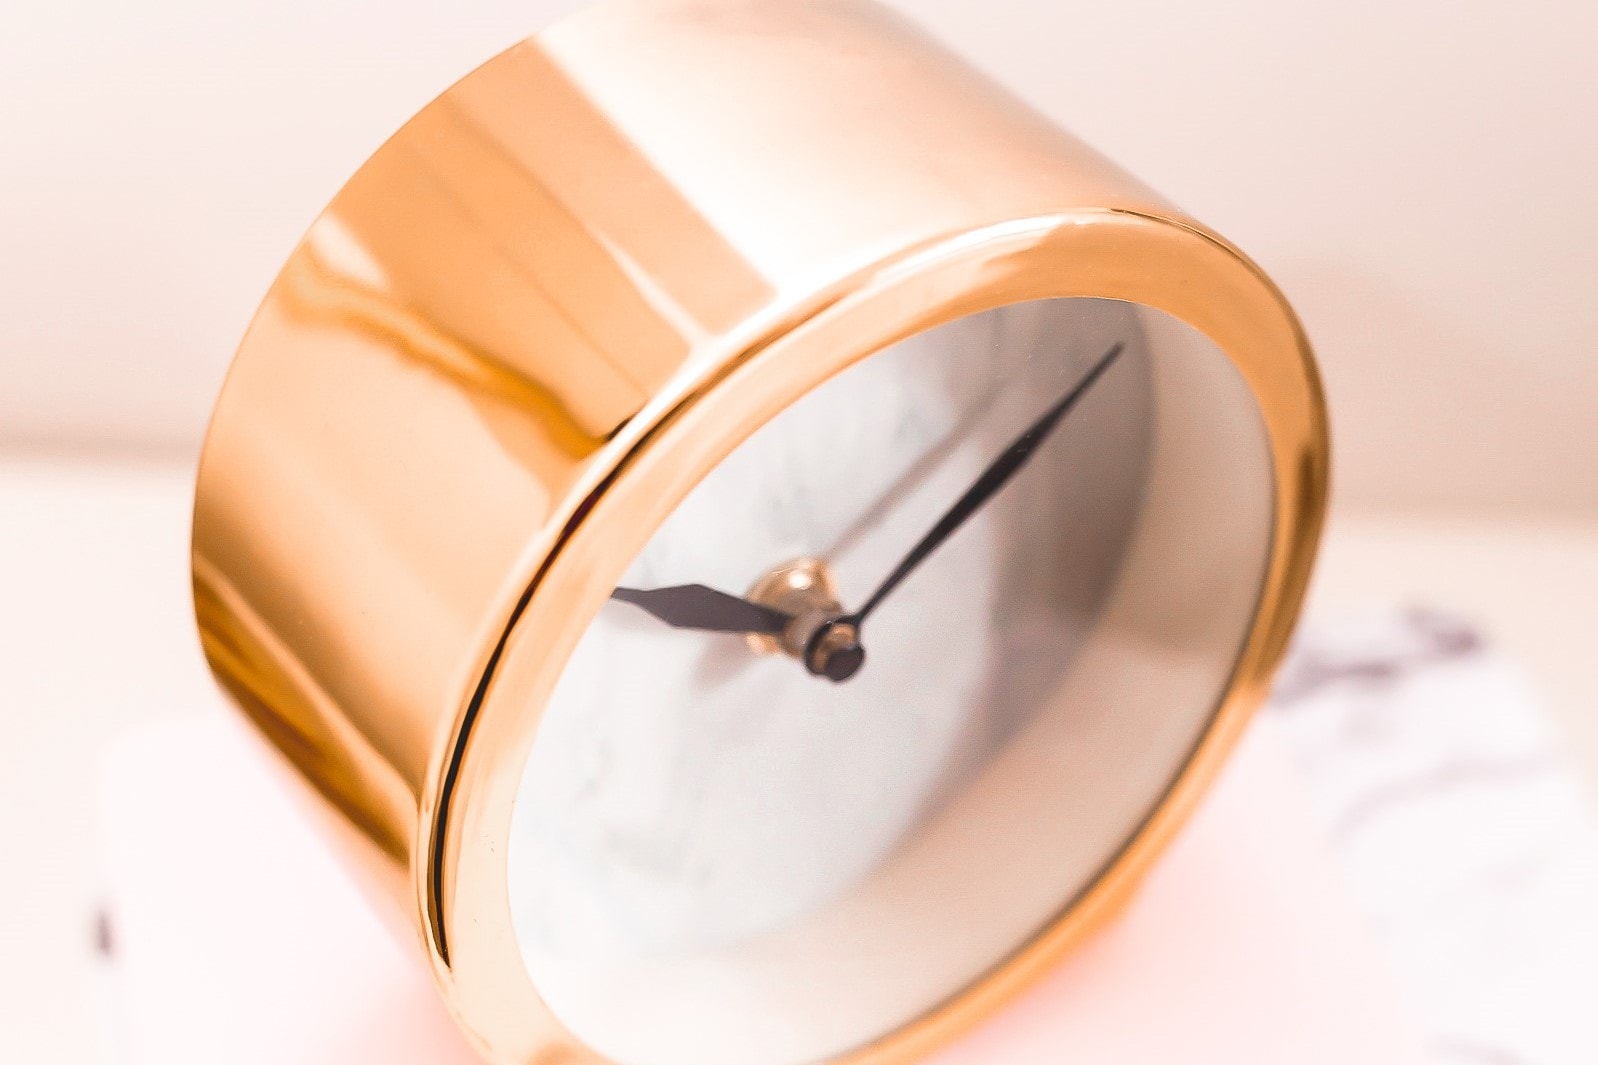 10 ways to stop wasting time and actually get stuff done!